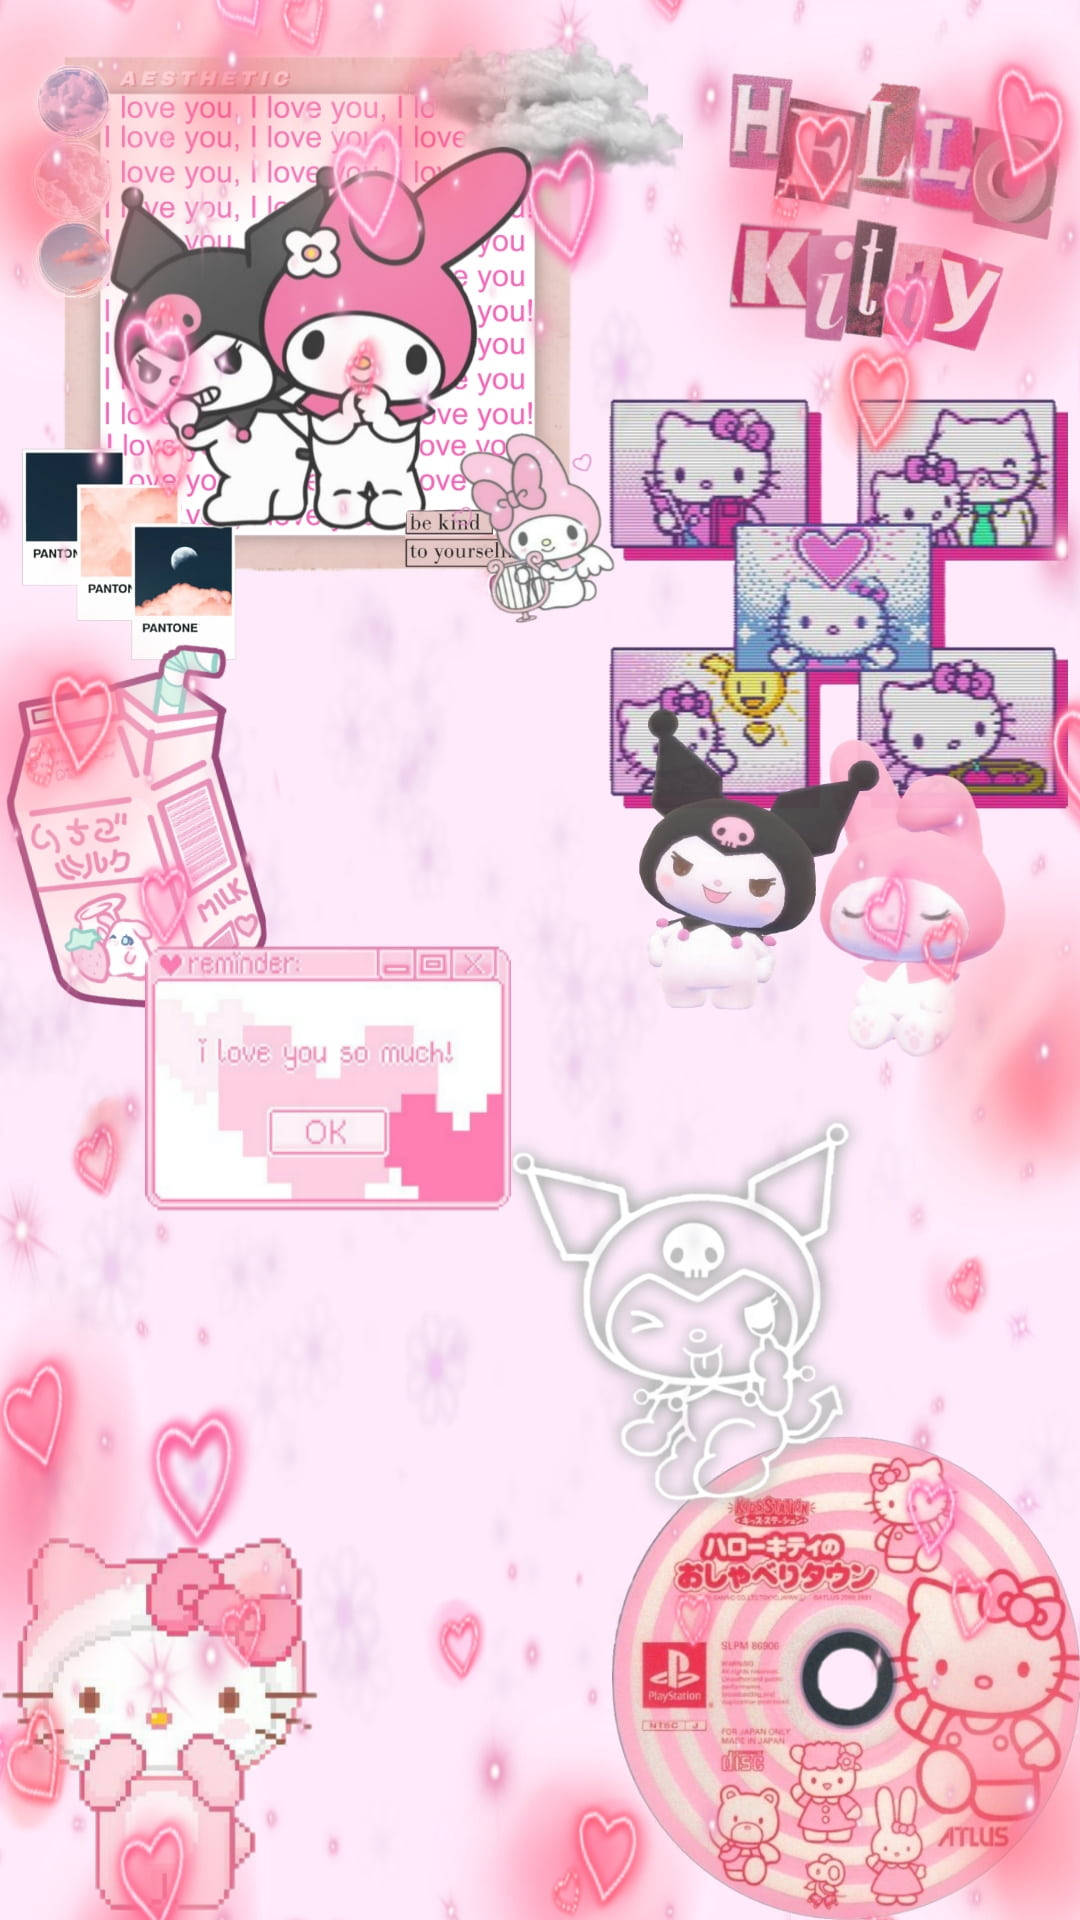 100+] Pink Hello Kitty Backgrounds